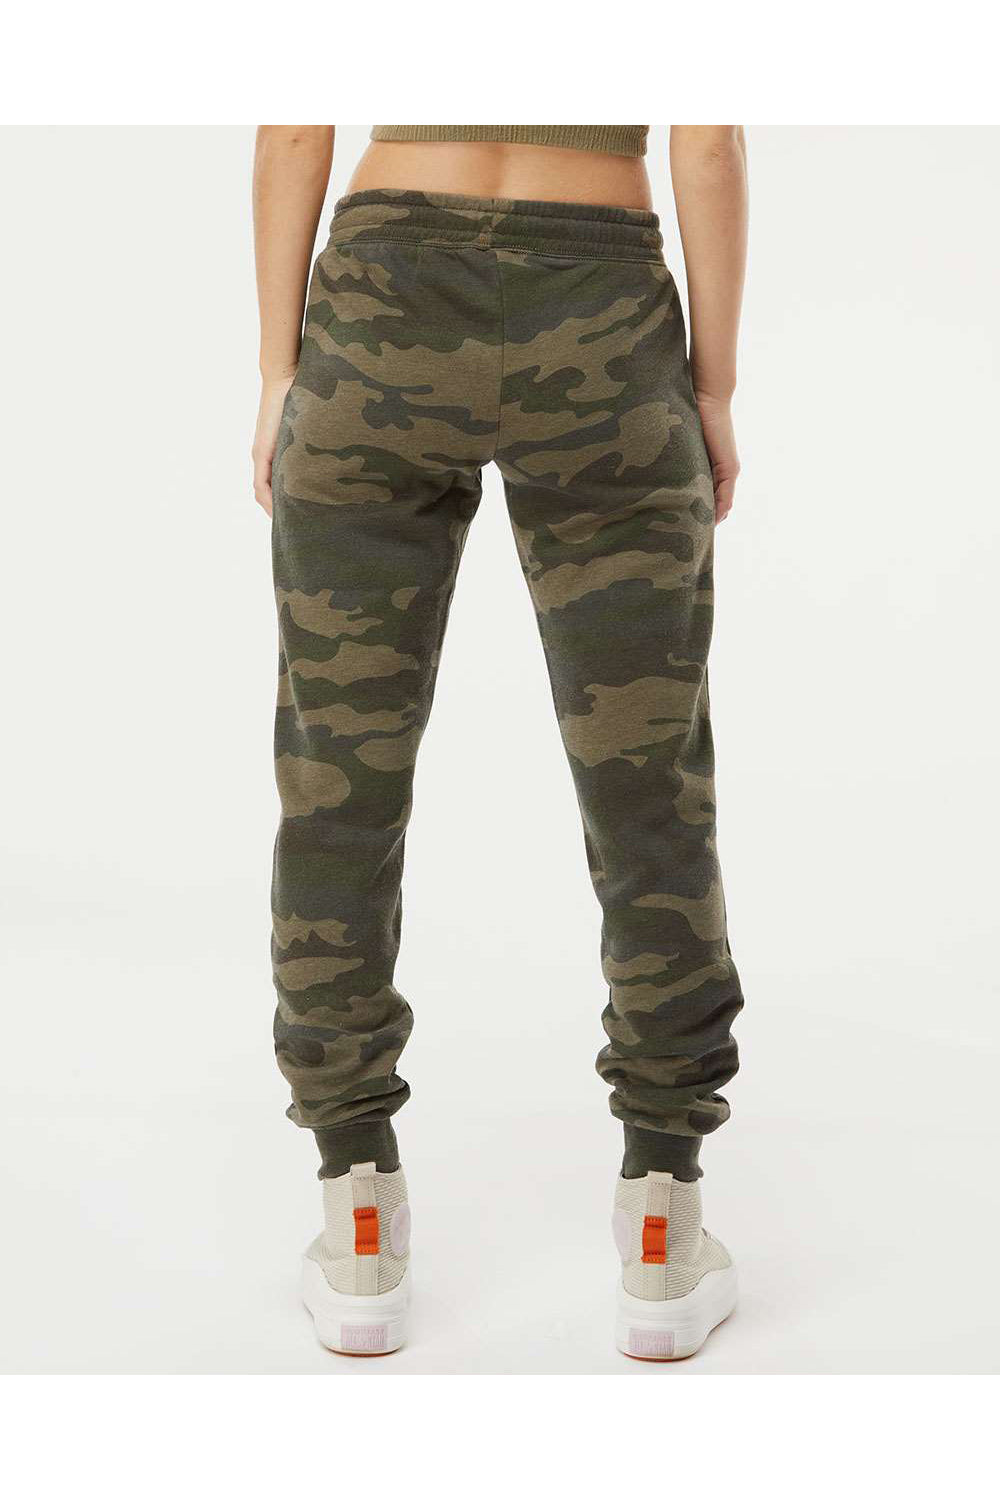 Independent Trading Co. PRM20PNT Womens California Wave Wash Sweatpants w/ Pockets Heather Forest Green Camo Model Back